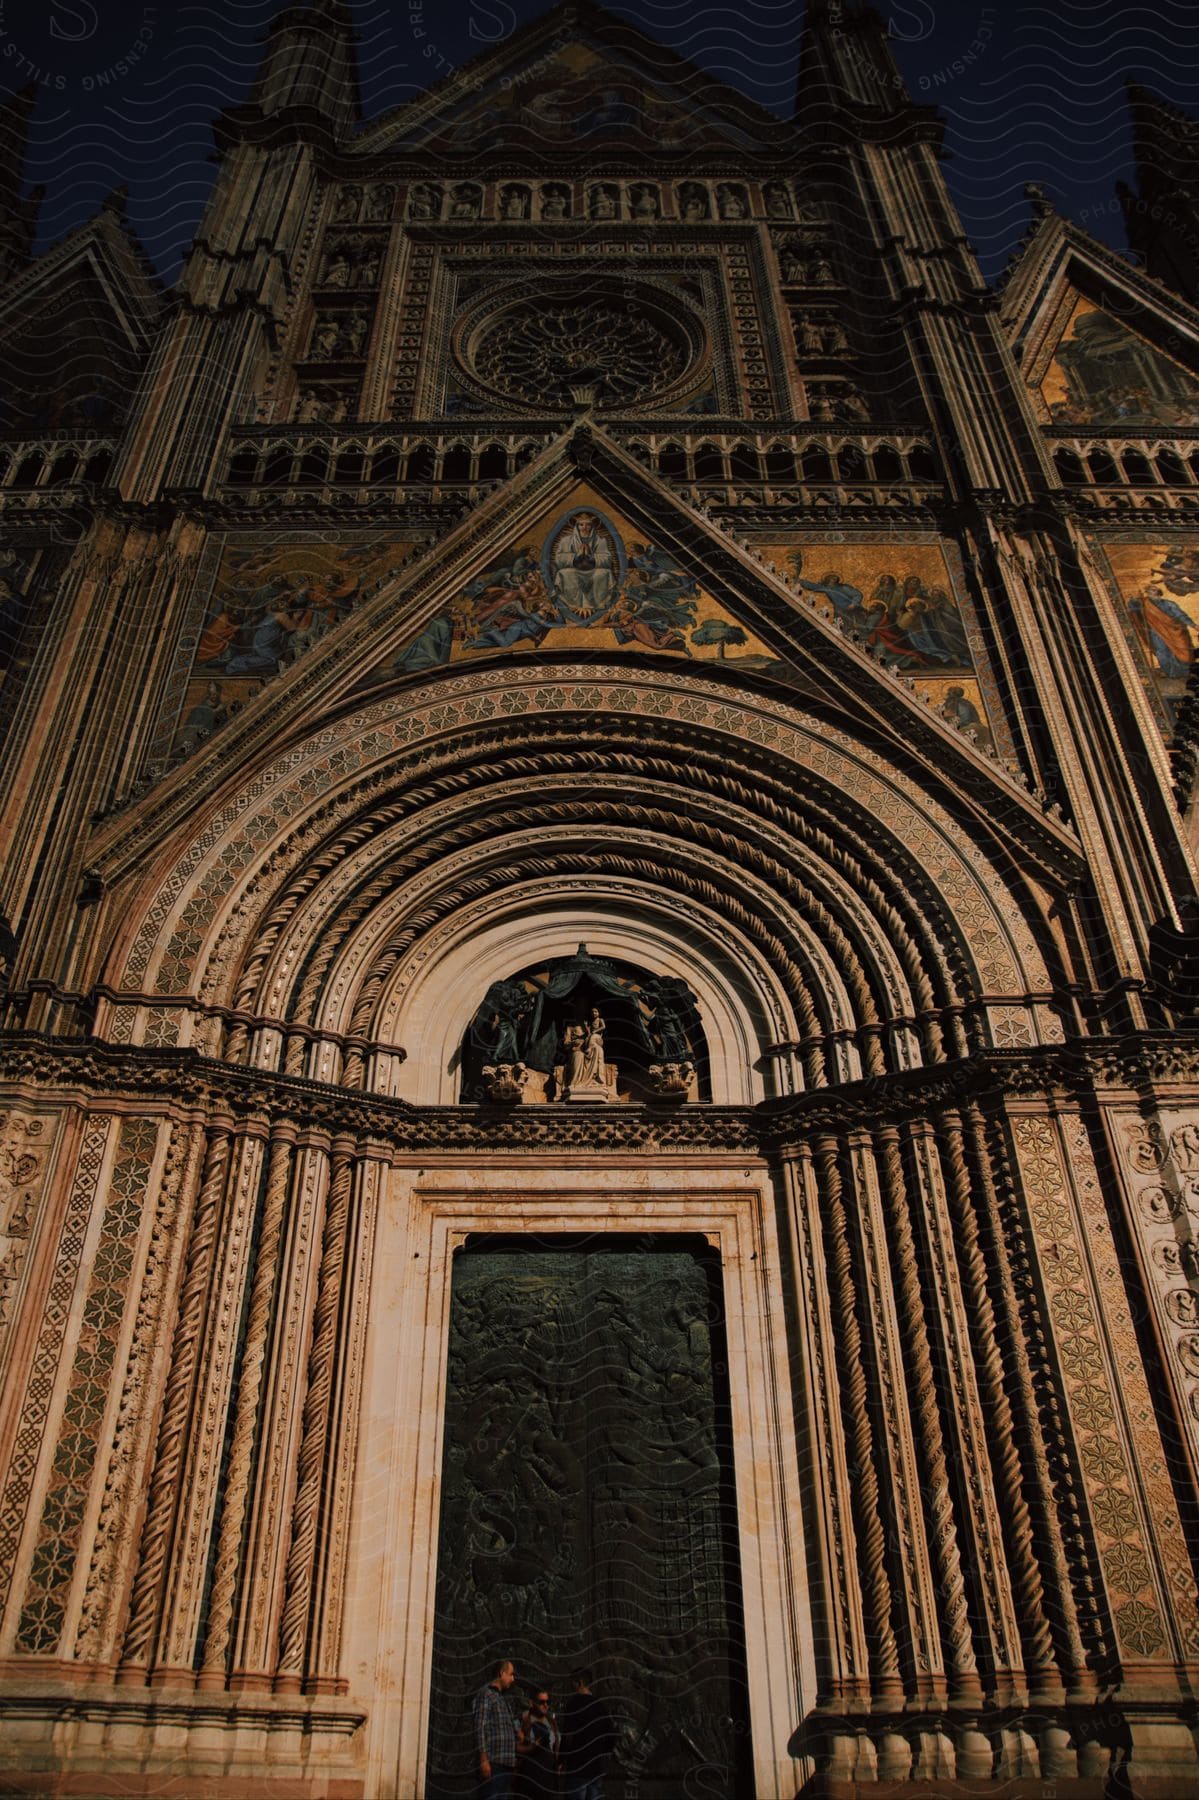 Facade of the Cathedral of Duomo di Orvieto at night.